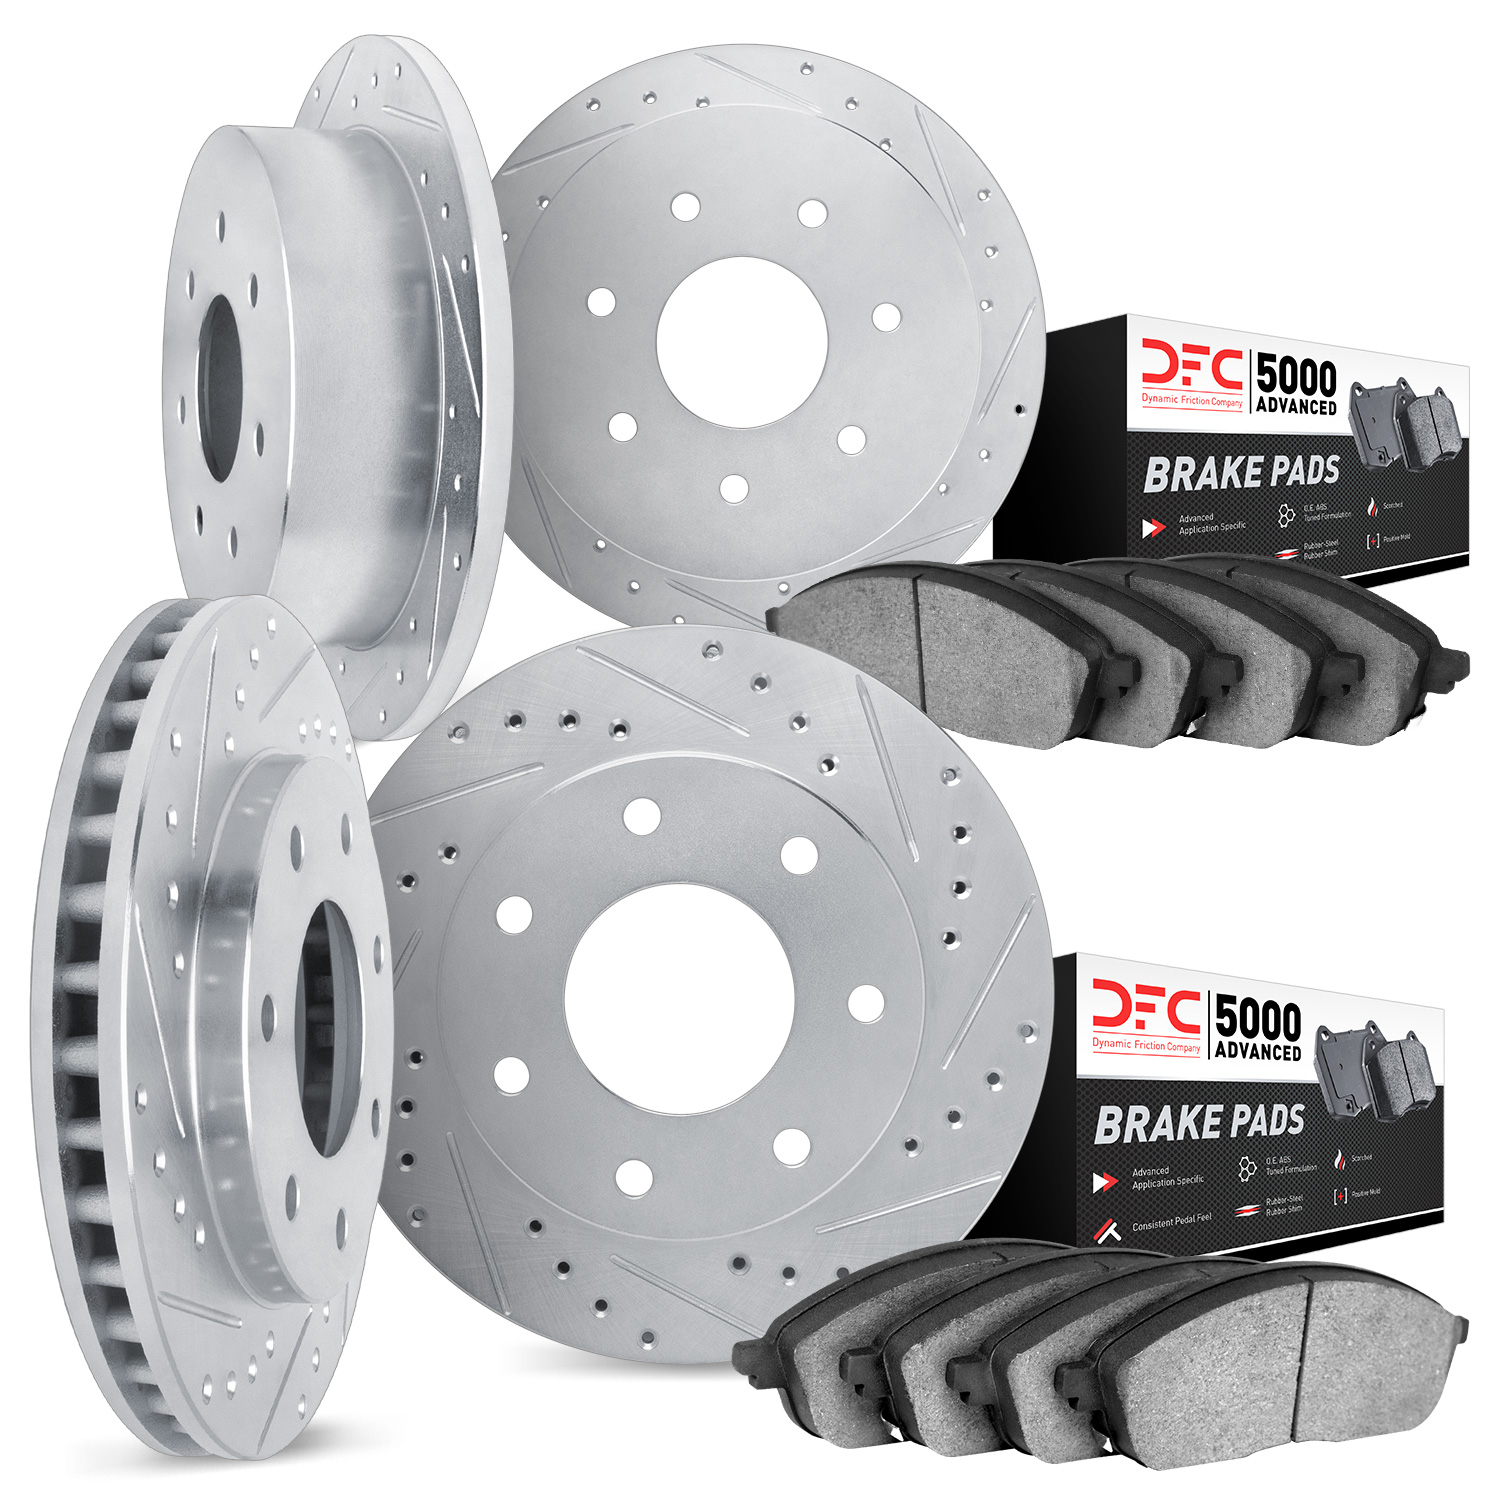 7504-54323 Drilled/Slotted Brake Rotors w/5000 Advanced Brake Pads Kit [Silver], 1997-2004 Ford/Lincoln/Mercury/Mazda, Position: